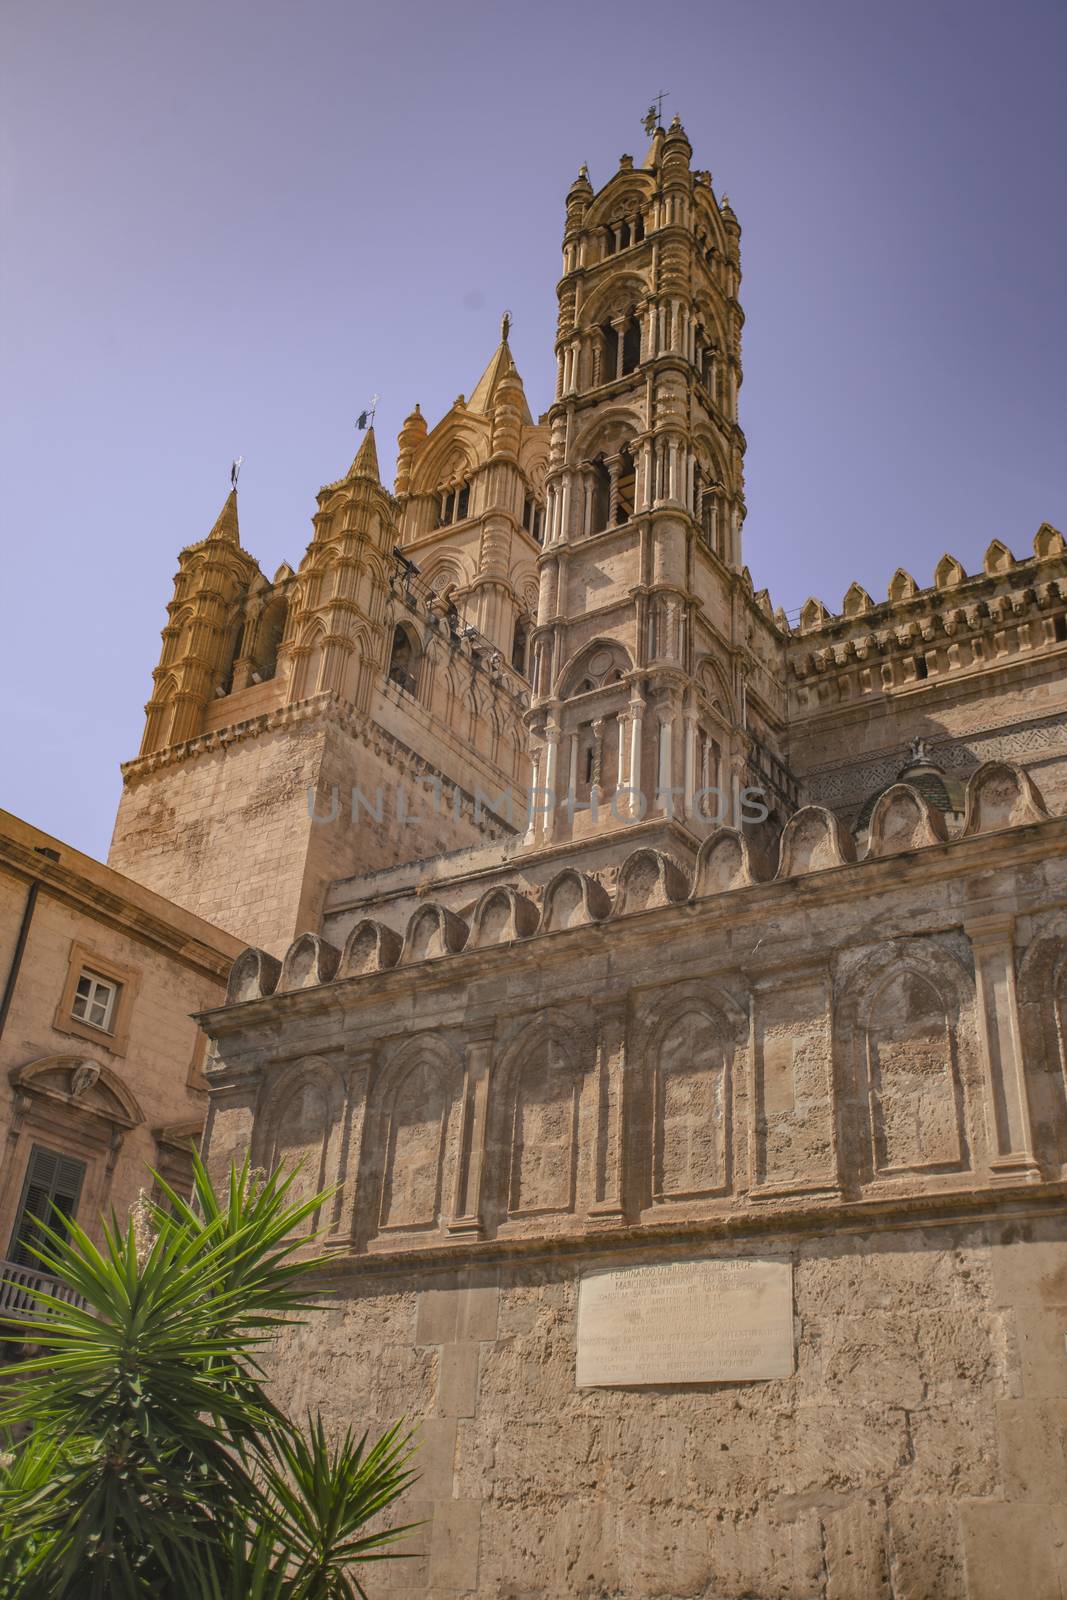 The Primatial Metropolitan Cathedral Basilica of the Holy Virgin Mary of the Assumption, known simply as the Cathedral Church of Palermo, is the main place of Catholic worship in the city of Palermo and archiepiscopal see of the homonymous metropolitan archdiocese.